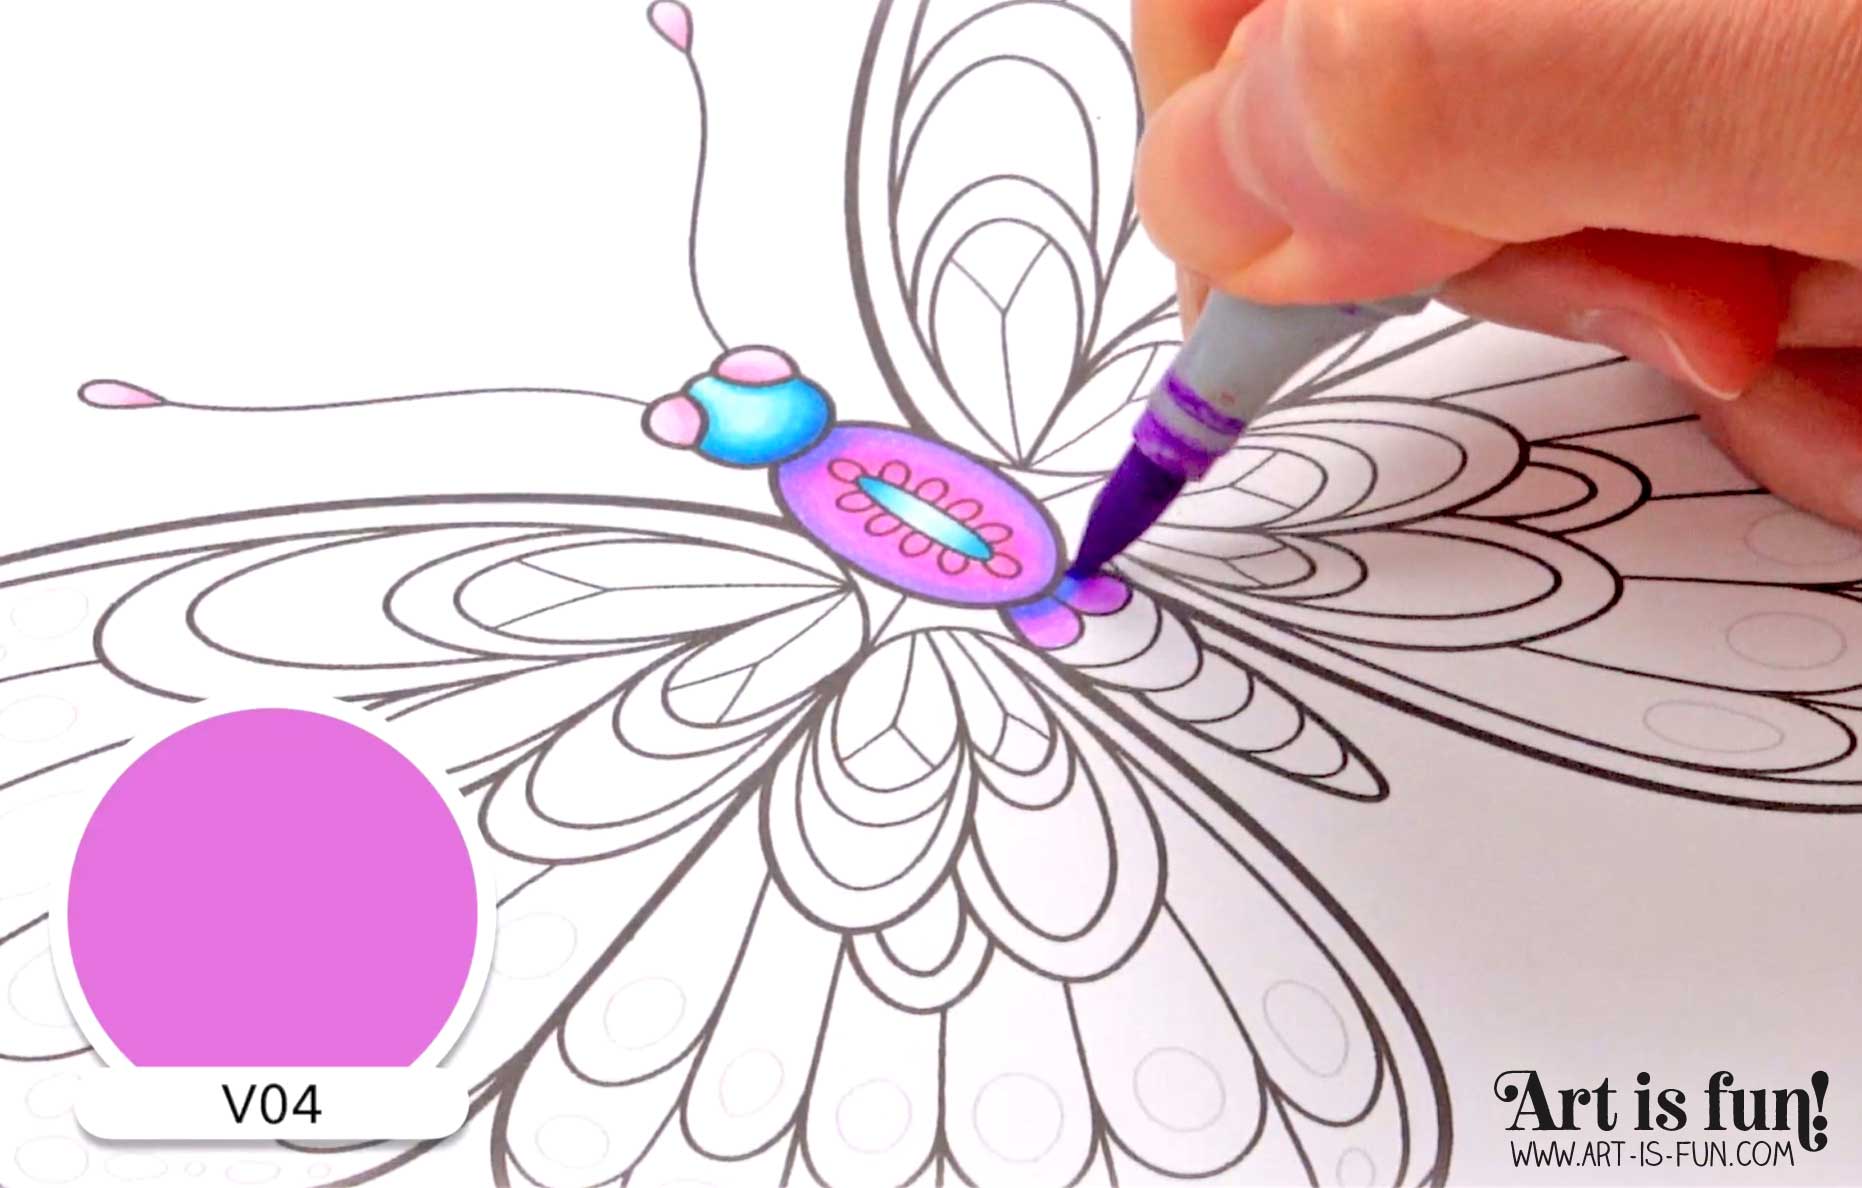 Learn how to use alcohol markers in this free video tutorial by Thaneeya McArdle